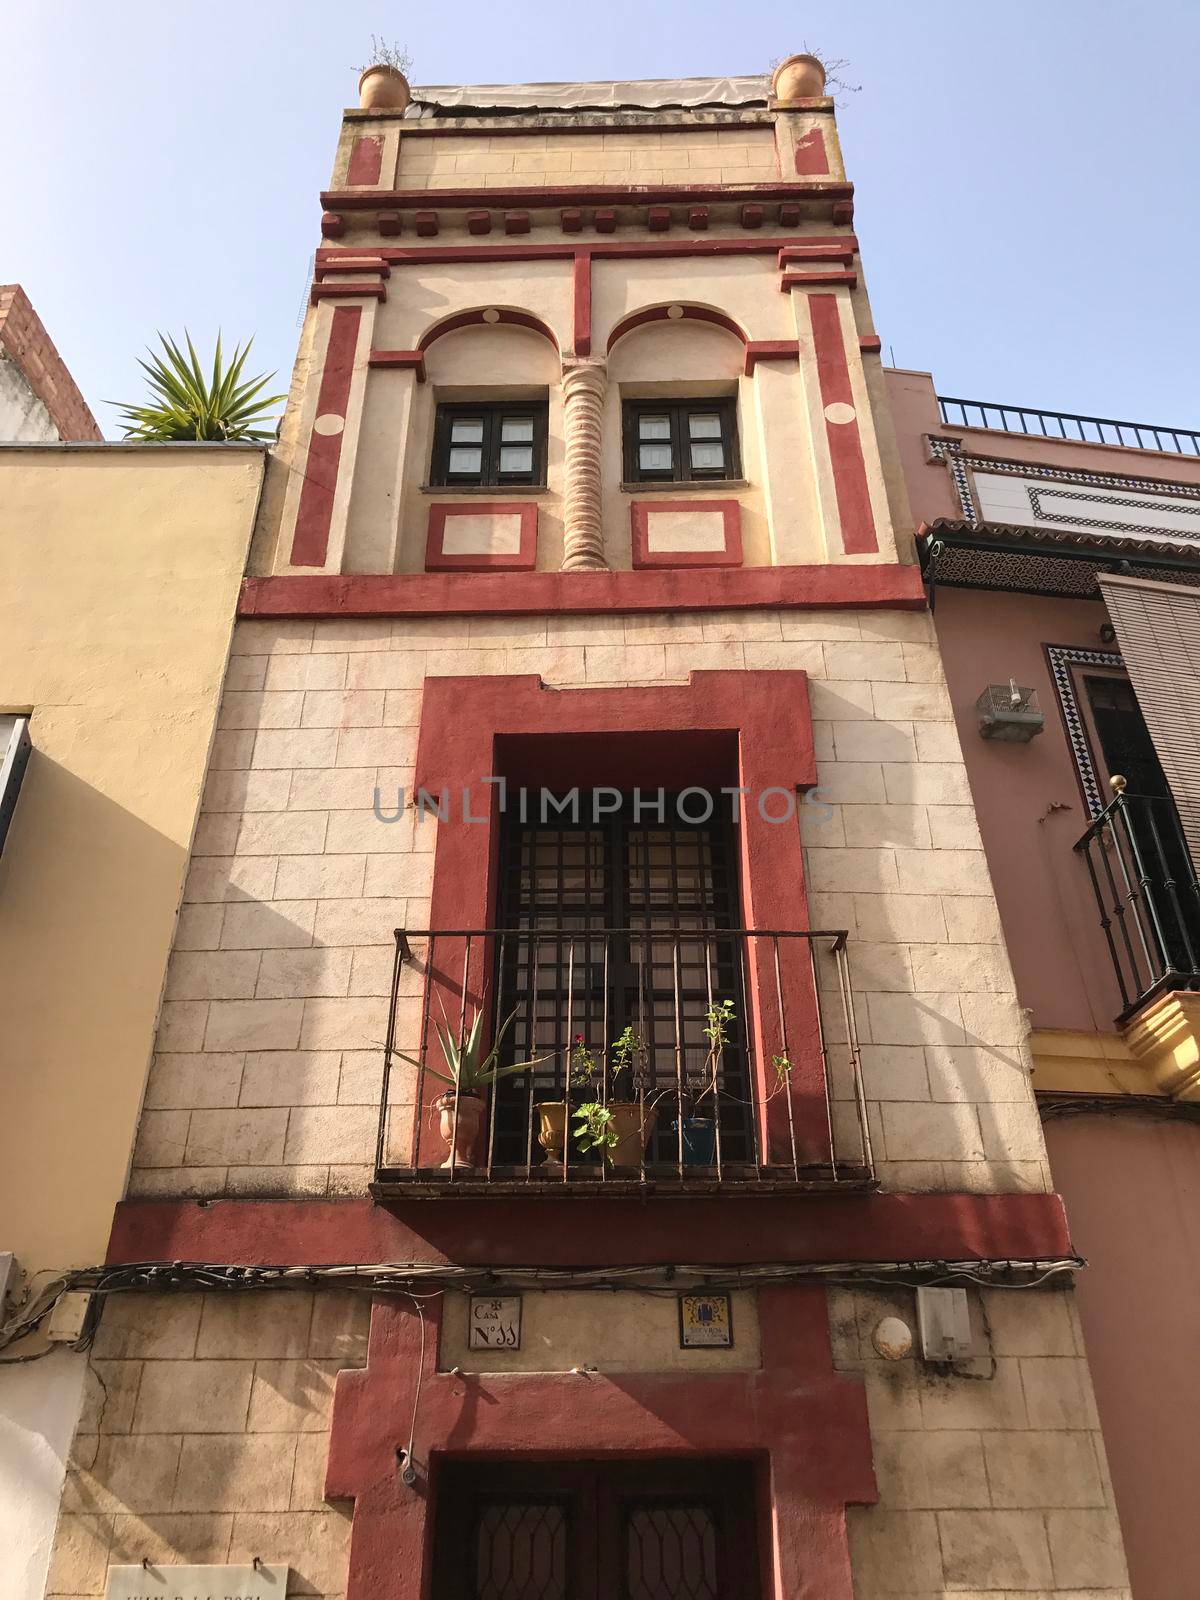 Tall house in the streets of Seville Spain